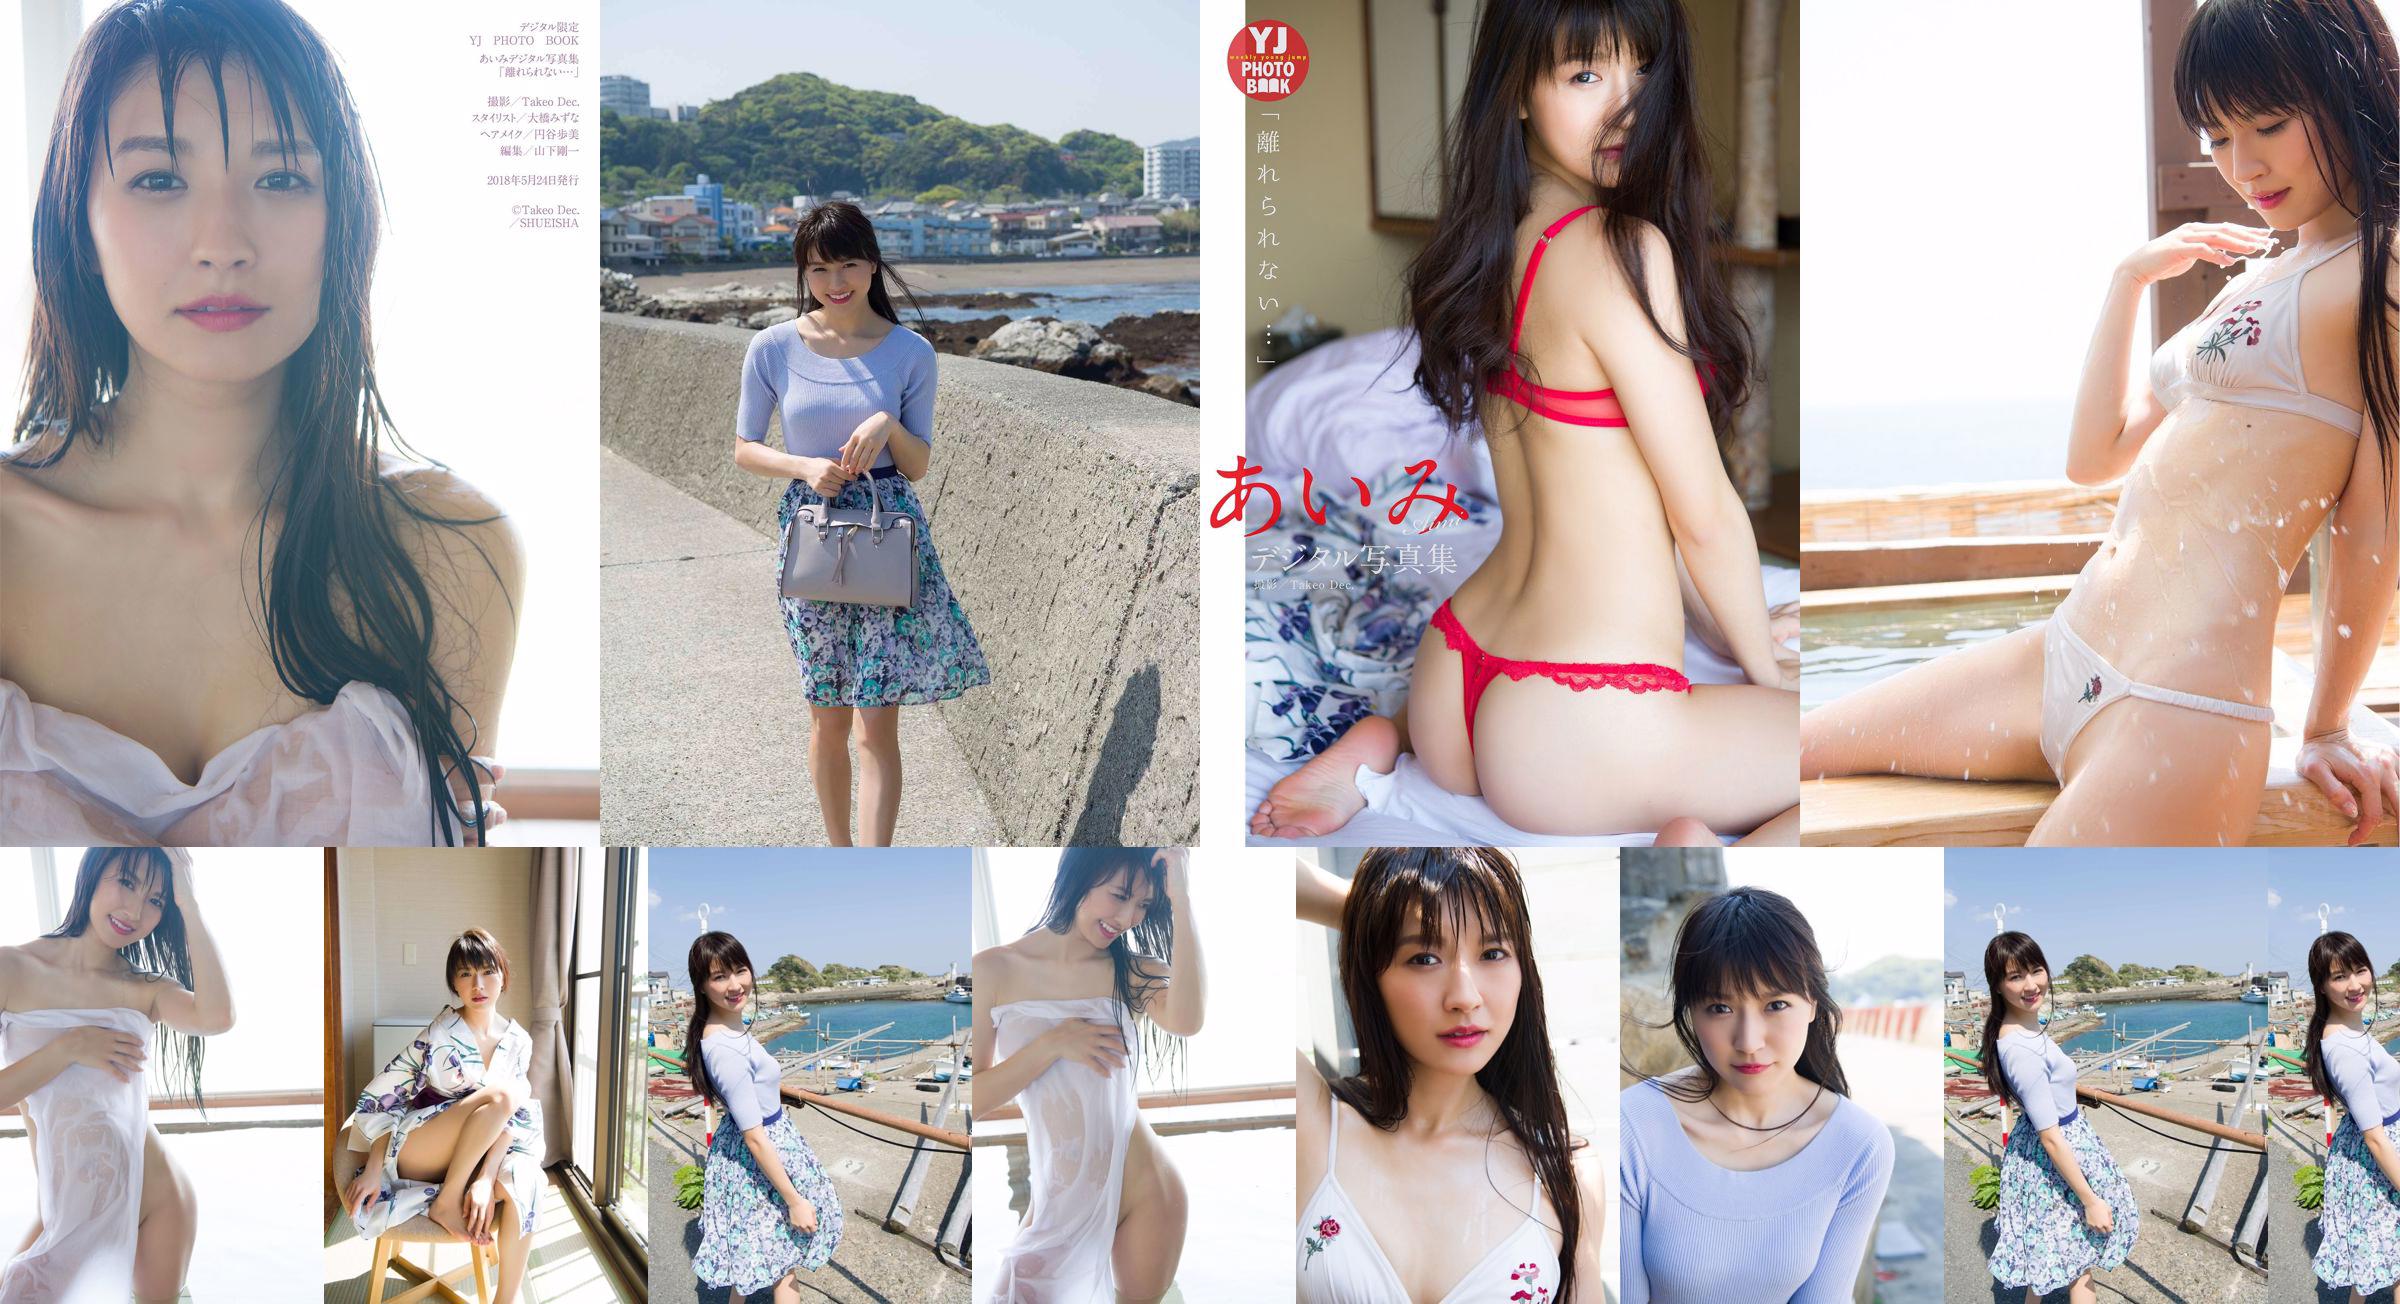 Aimi Nakano "I can't leave ..." [Digital Limited YJ PHOTO BOOK] No.850702 Page 11